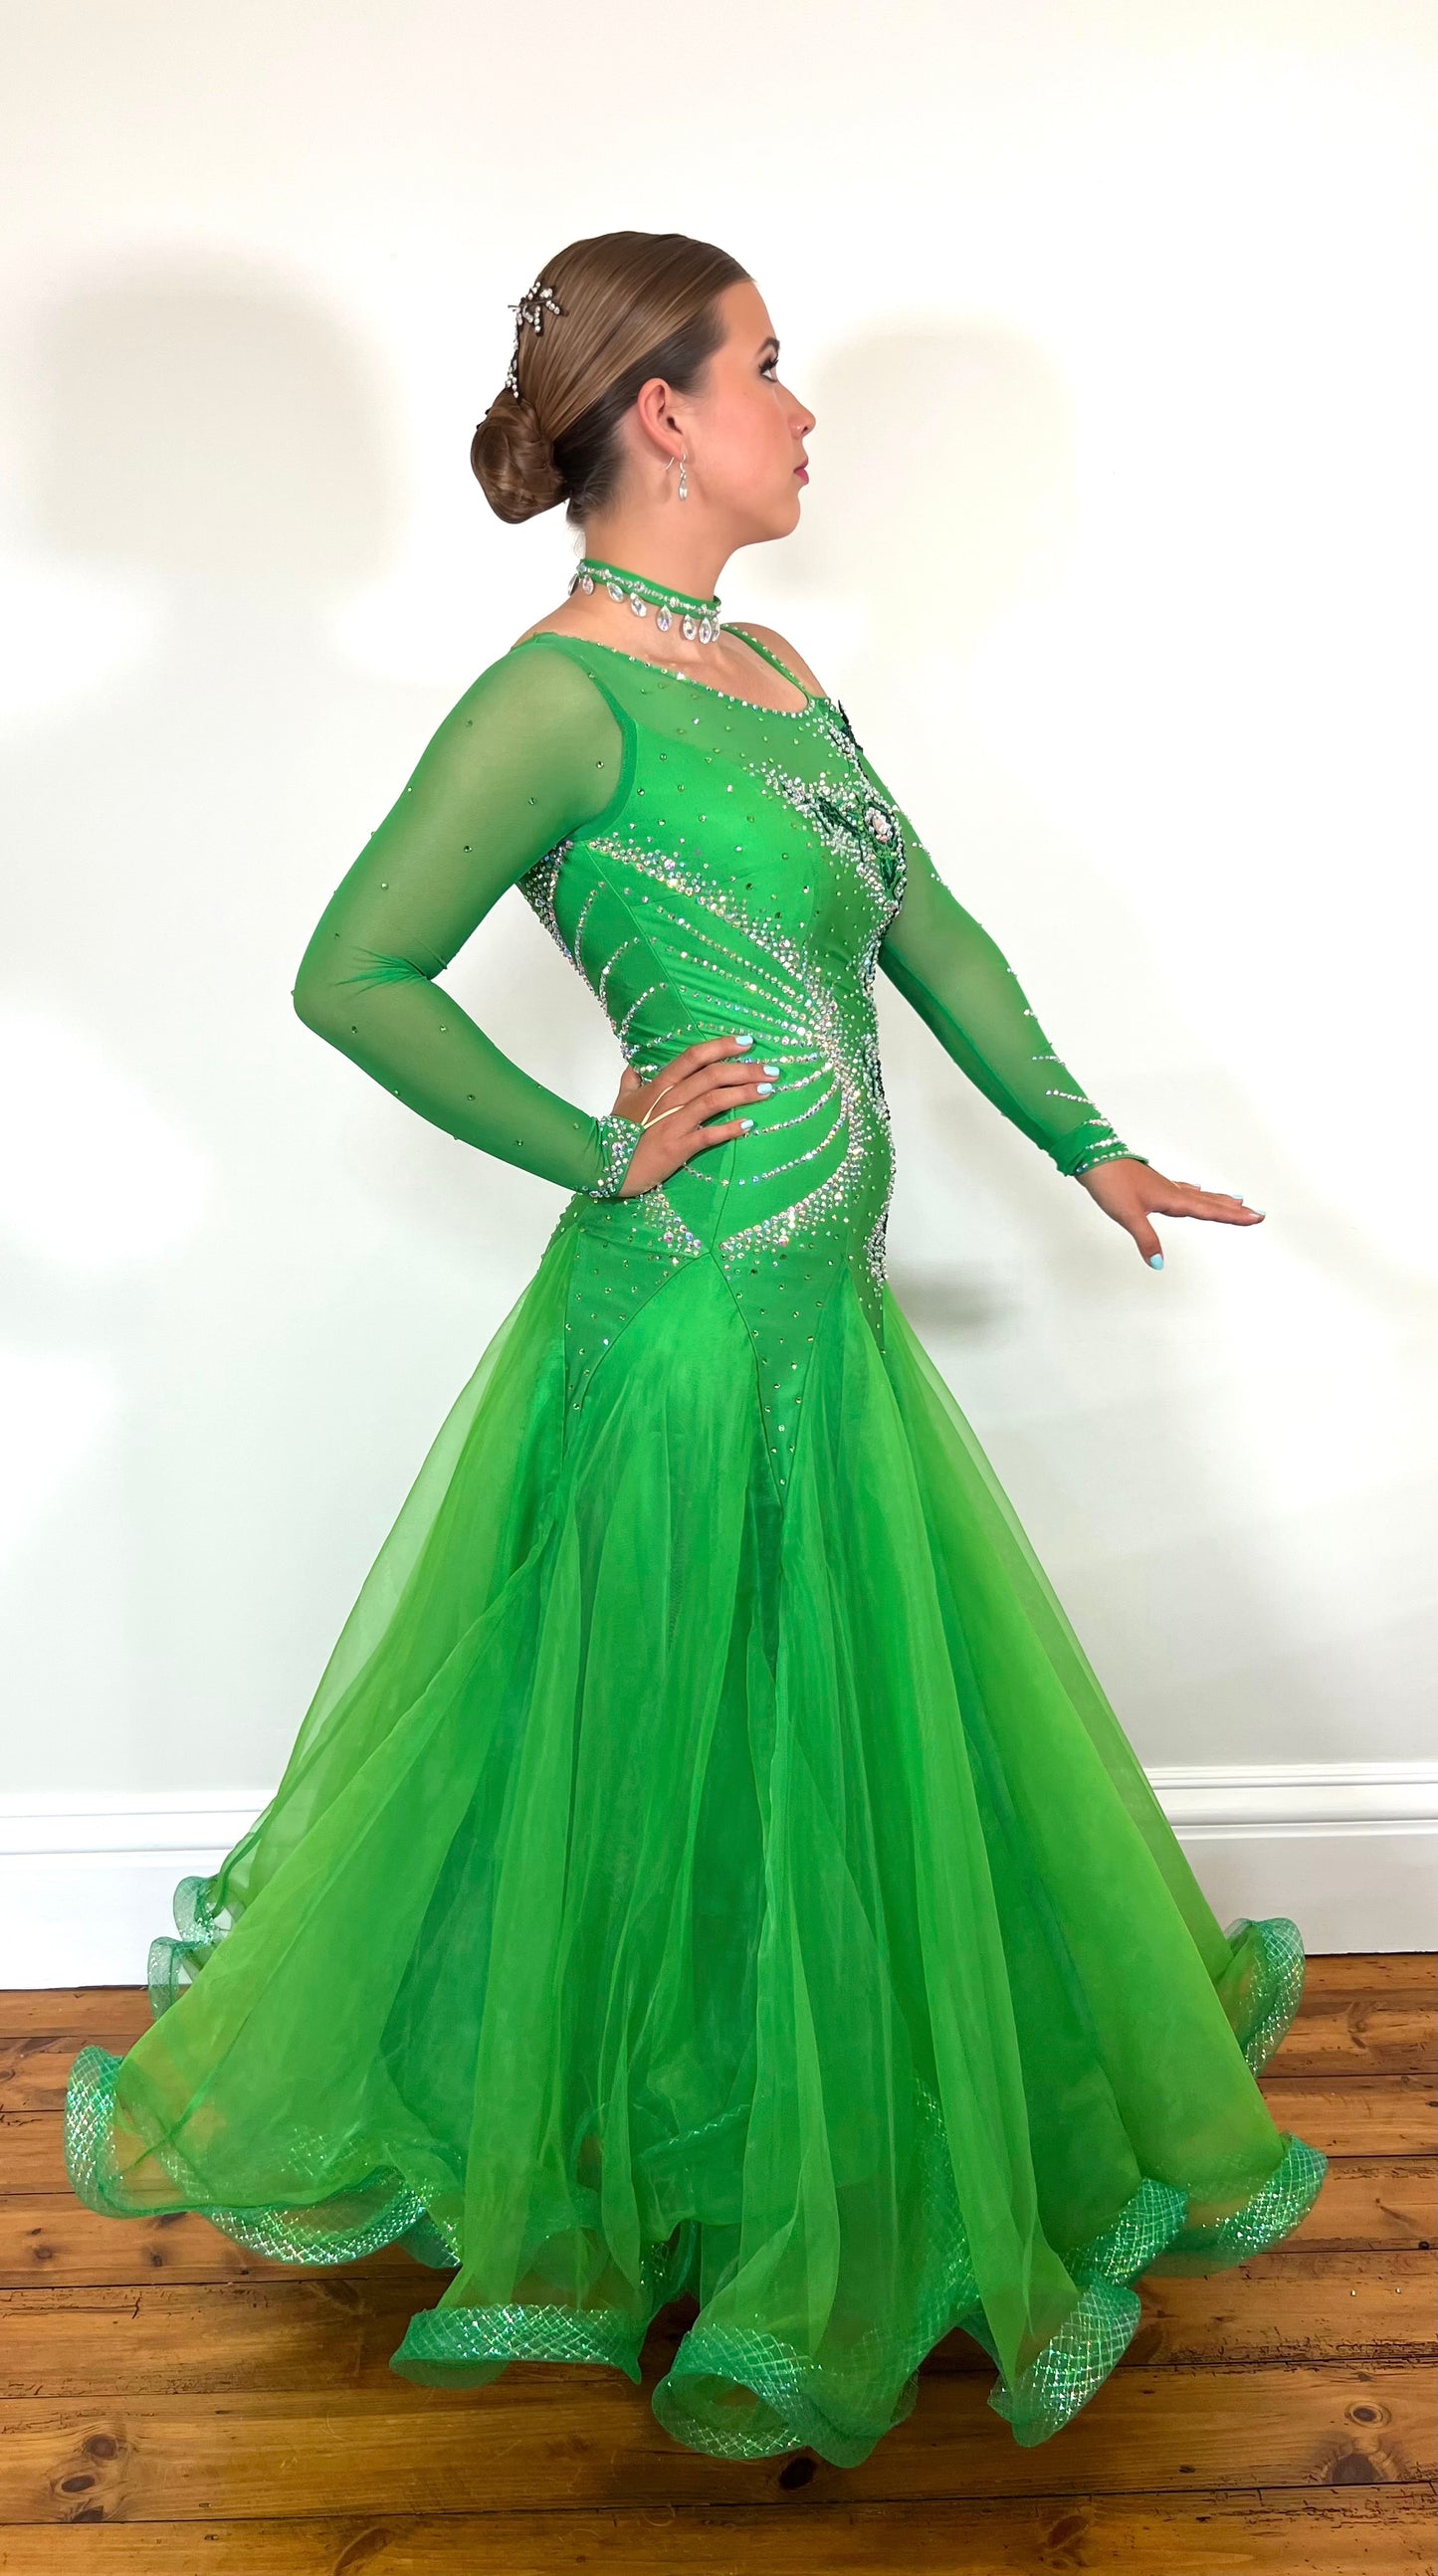 010 Apple Green one Shoulder, one cold shoulder Ballroom Dress. Appliqué stoned in AB & Jade to one side of the bodice.